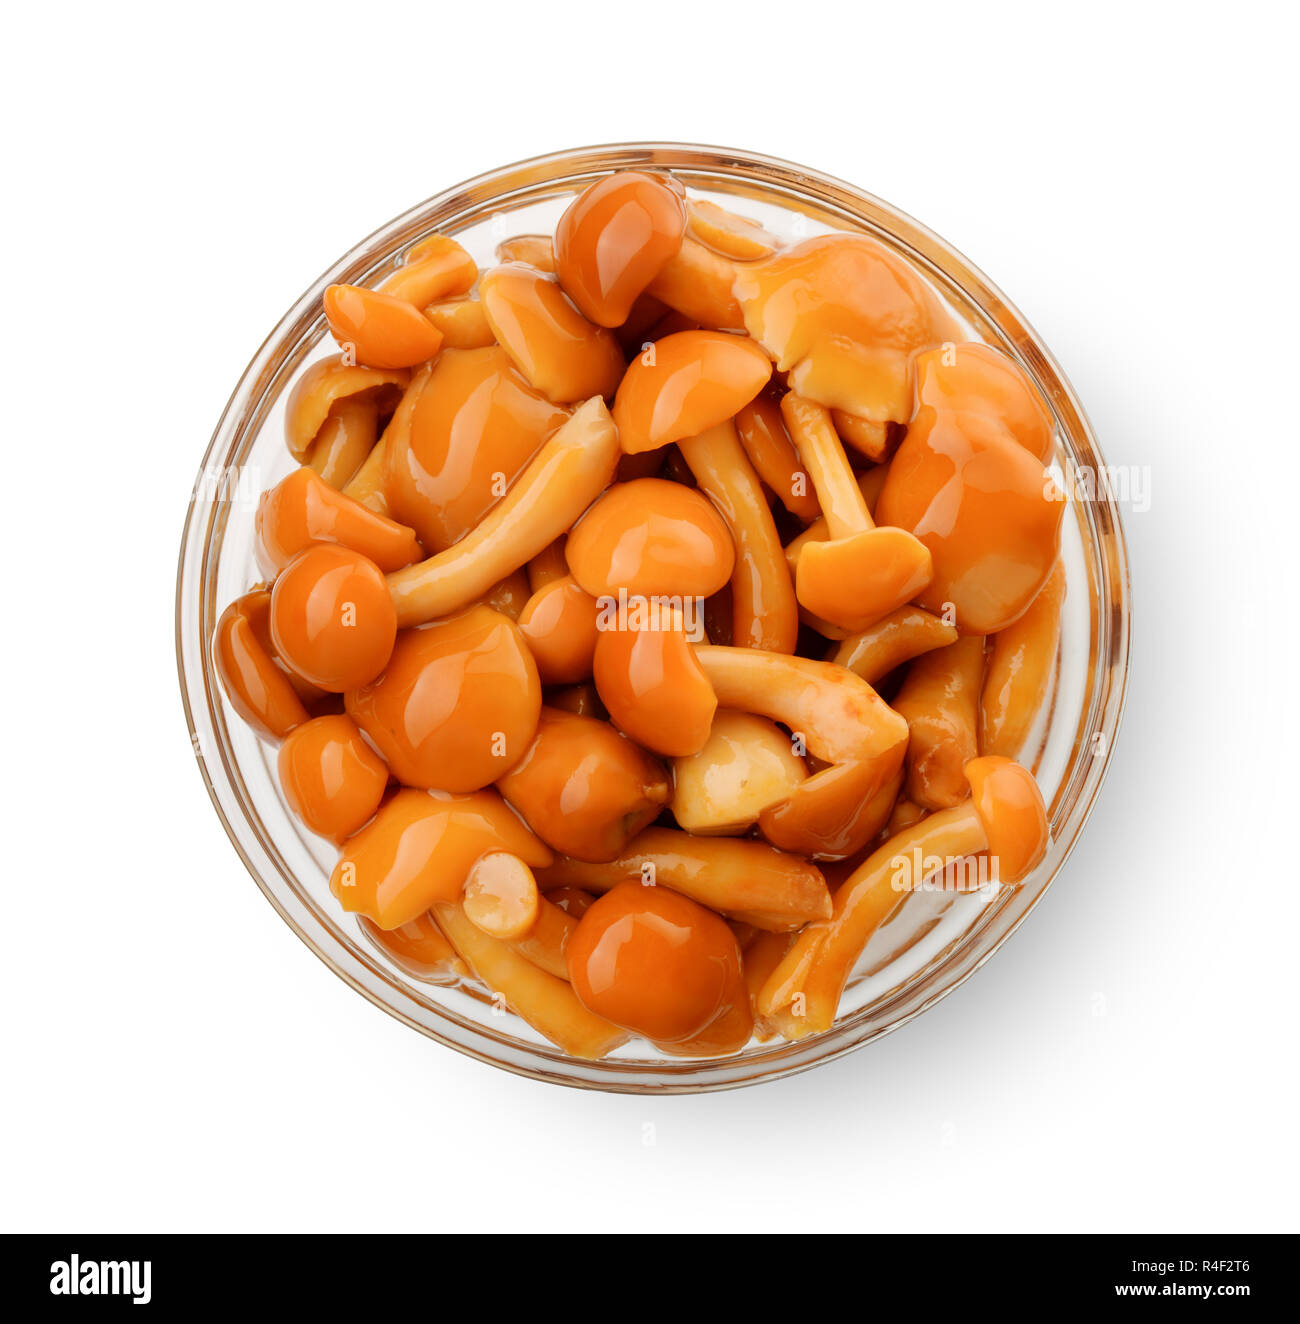 Top view of pickled mushrooms in glass bowl isolated on white Stock Photo